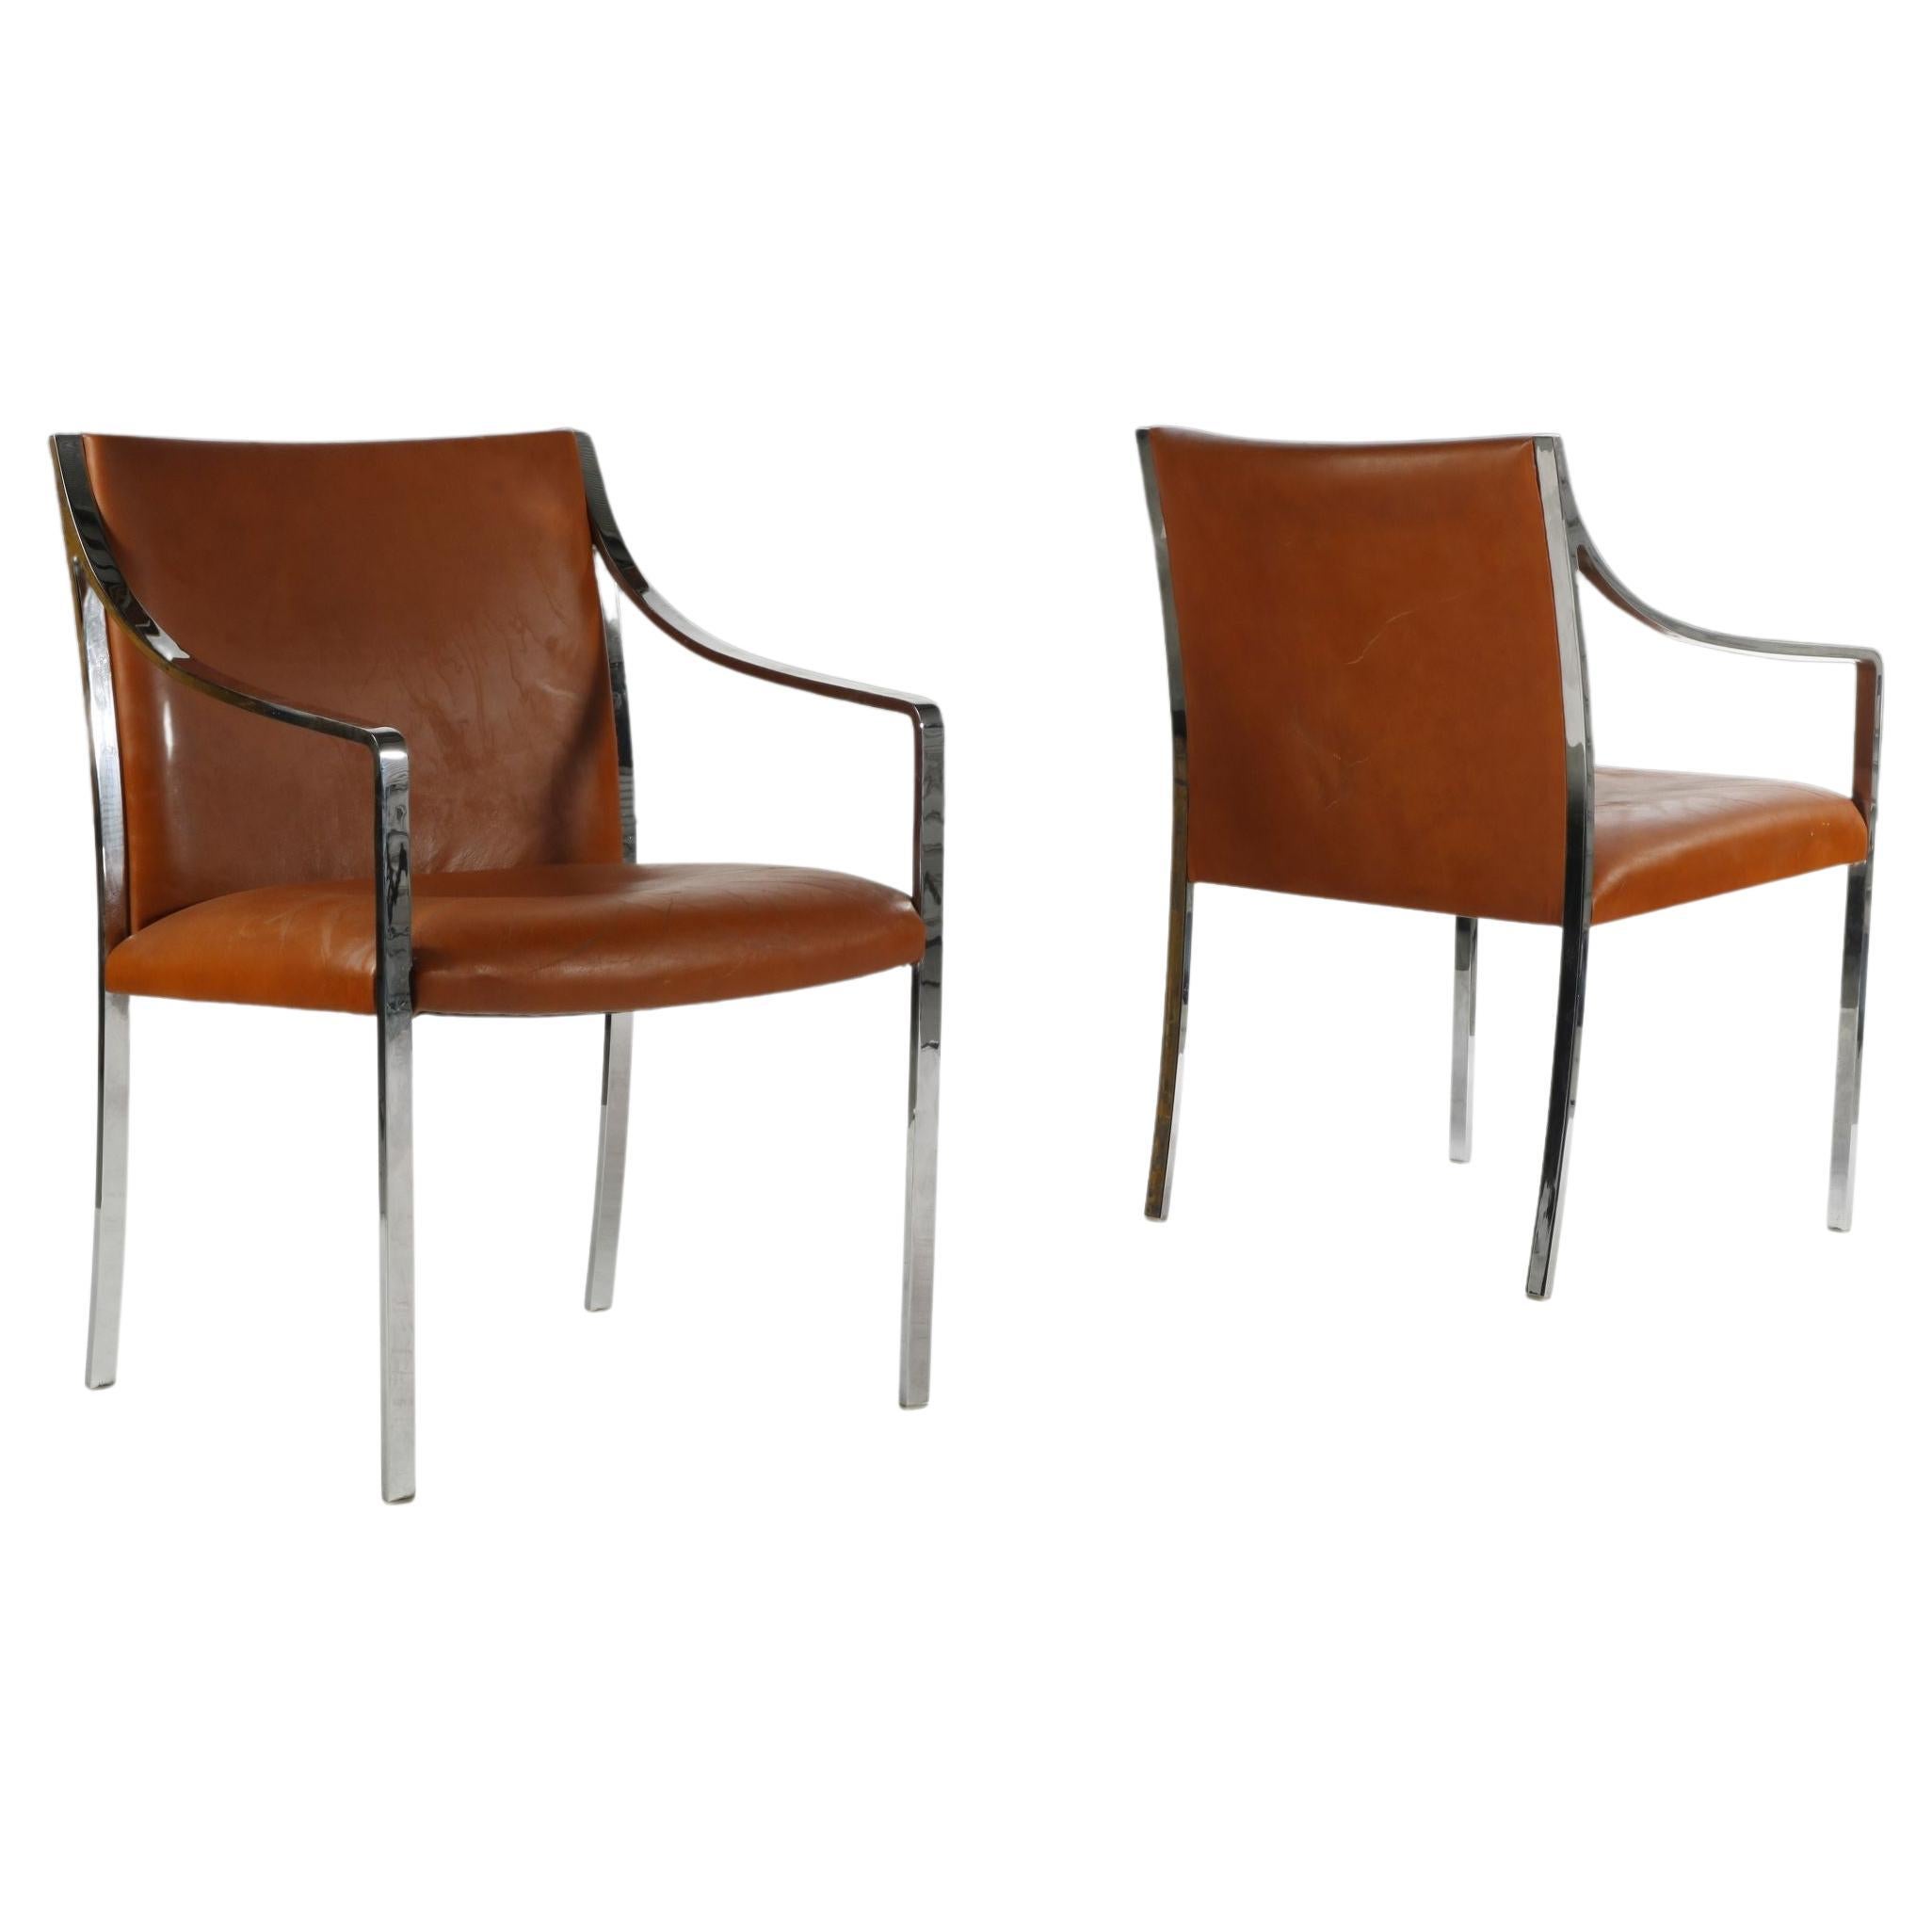 Set of Two (2) Chrome Accent Chairs in Original Naugahyde by Bert England, 1970s For Sale